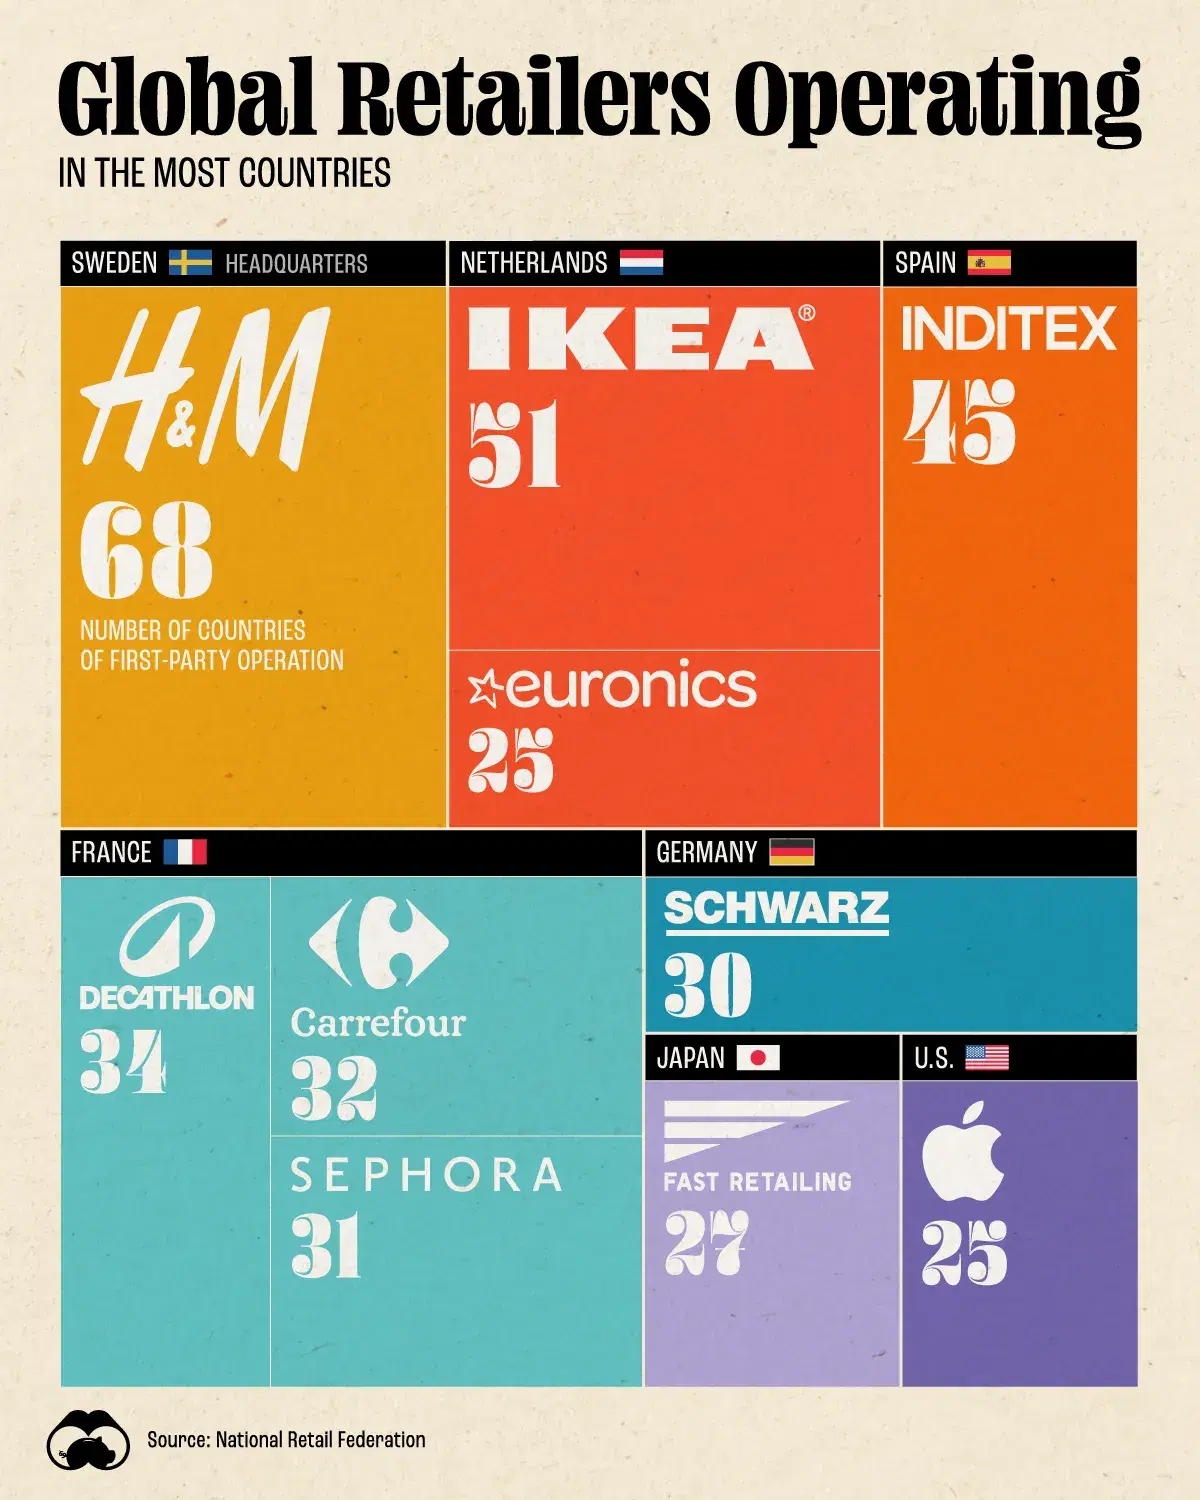 The Global Retailers Operating in the Most Countries